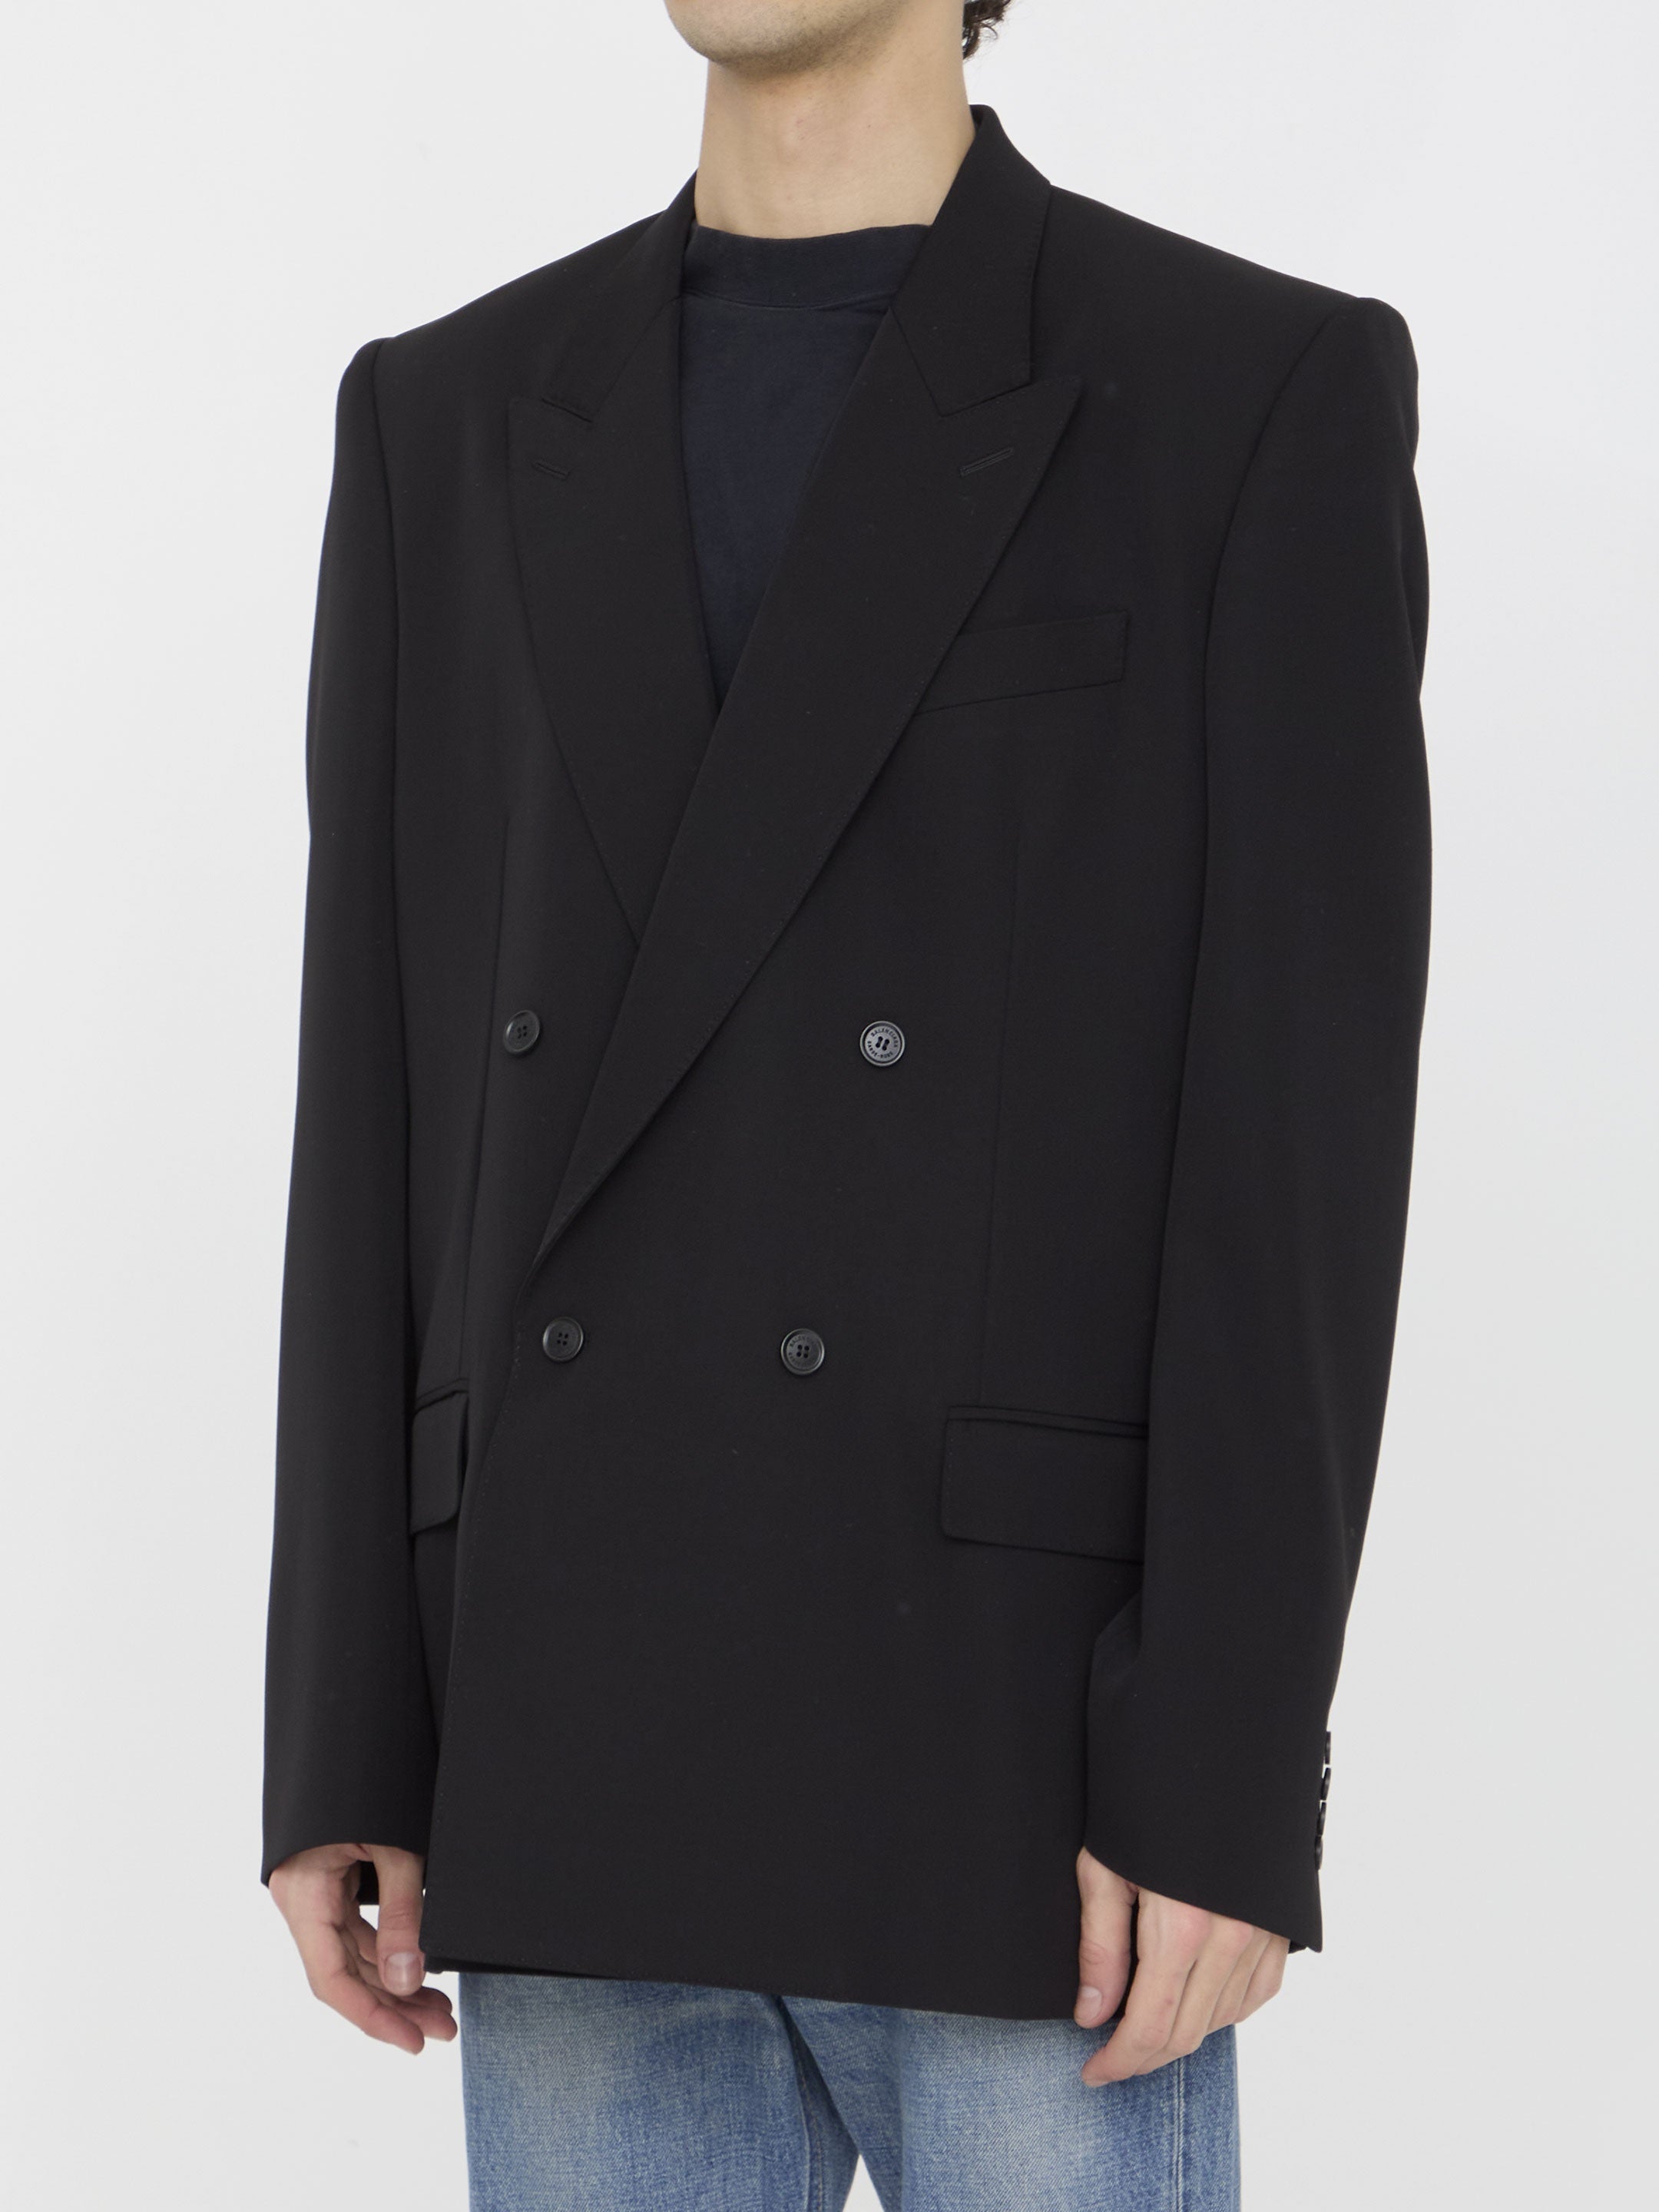 BALENCIAGA-OUTLET-SALE-Oversized-Blazer-CLOTHING-XS-BLACK-ARCHIVE-COLLECTION-2.jpg